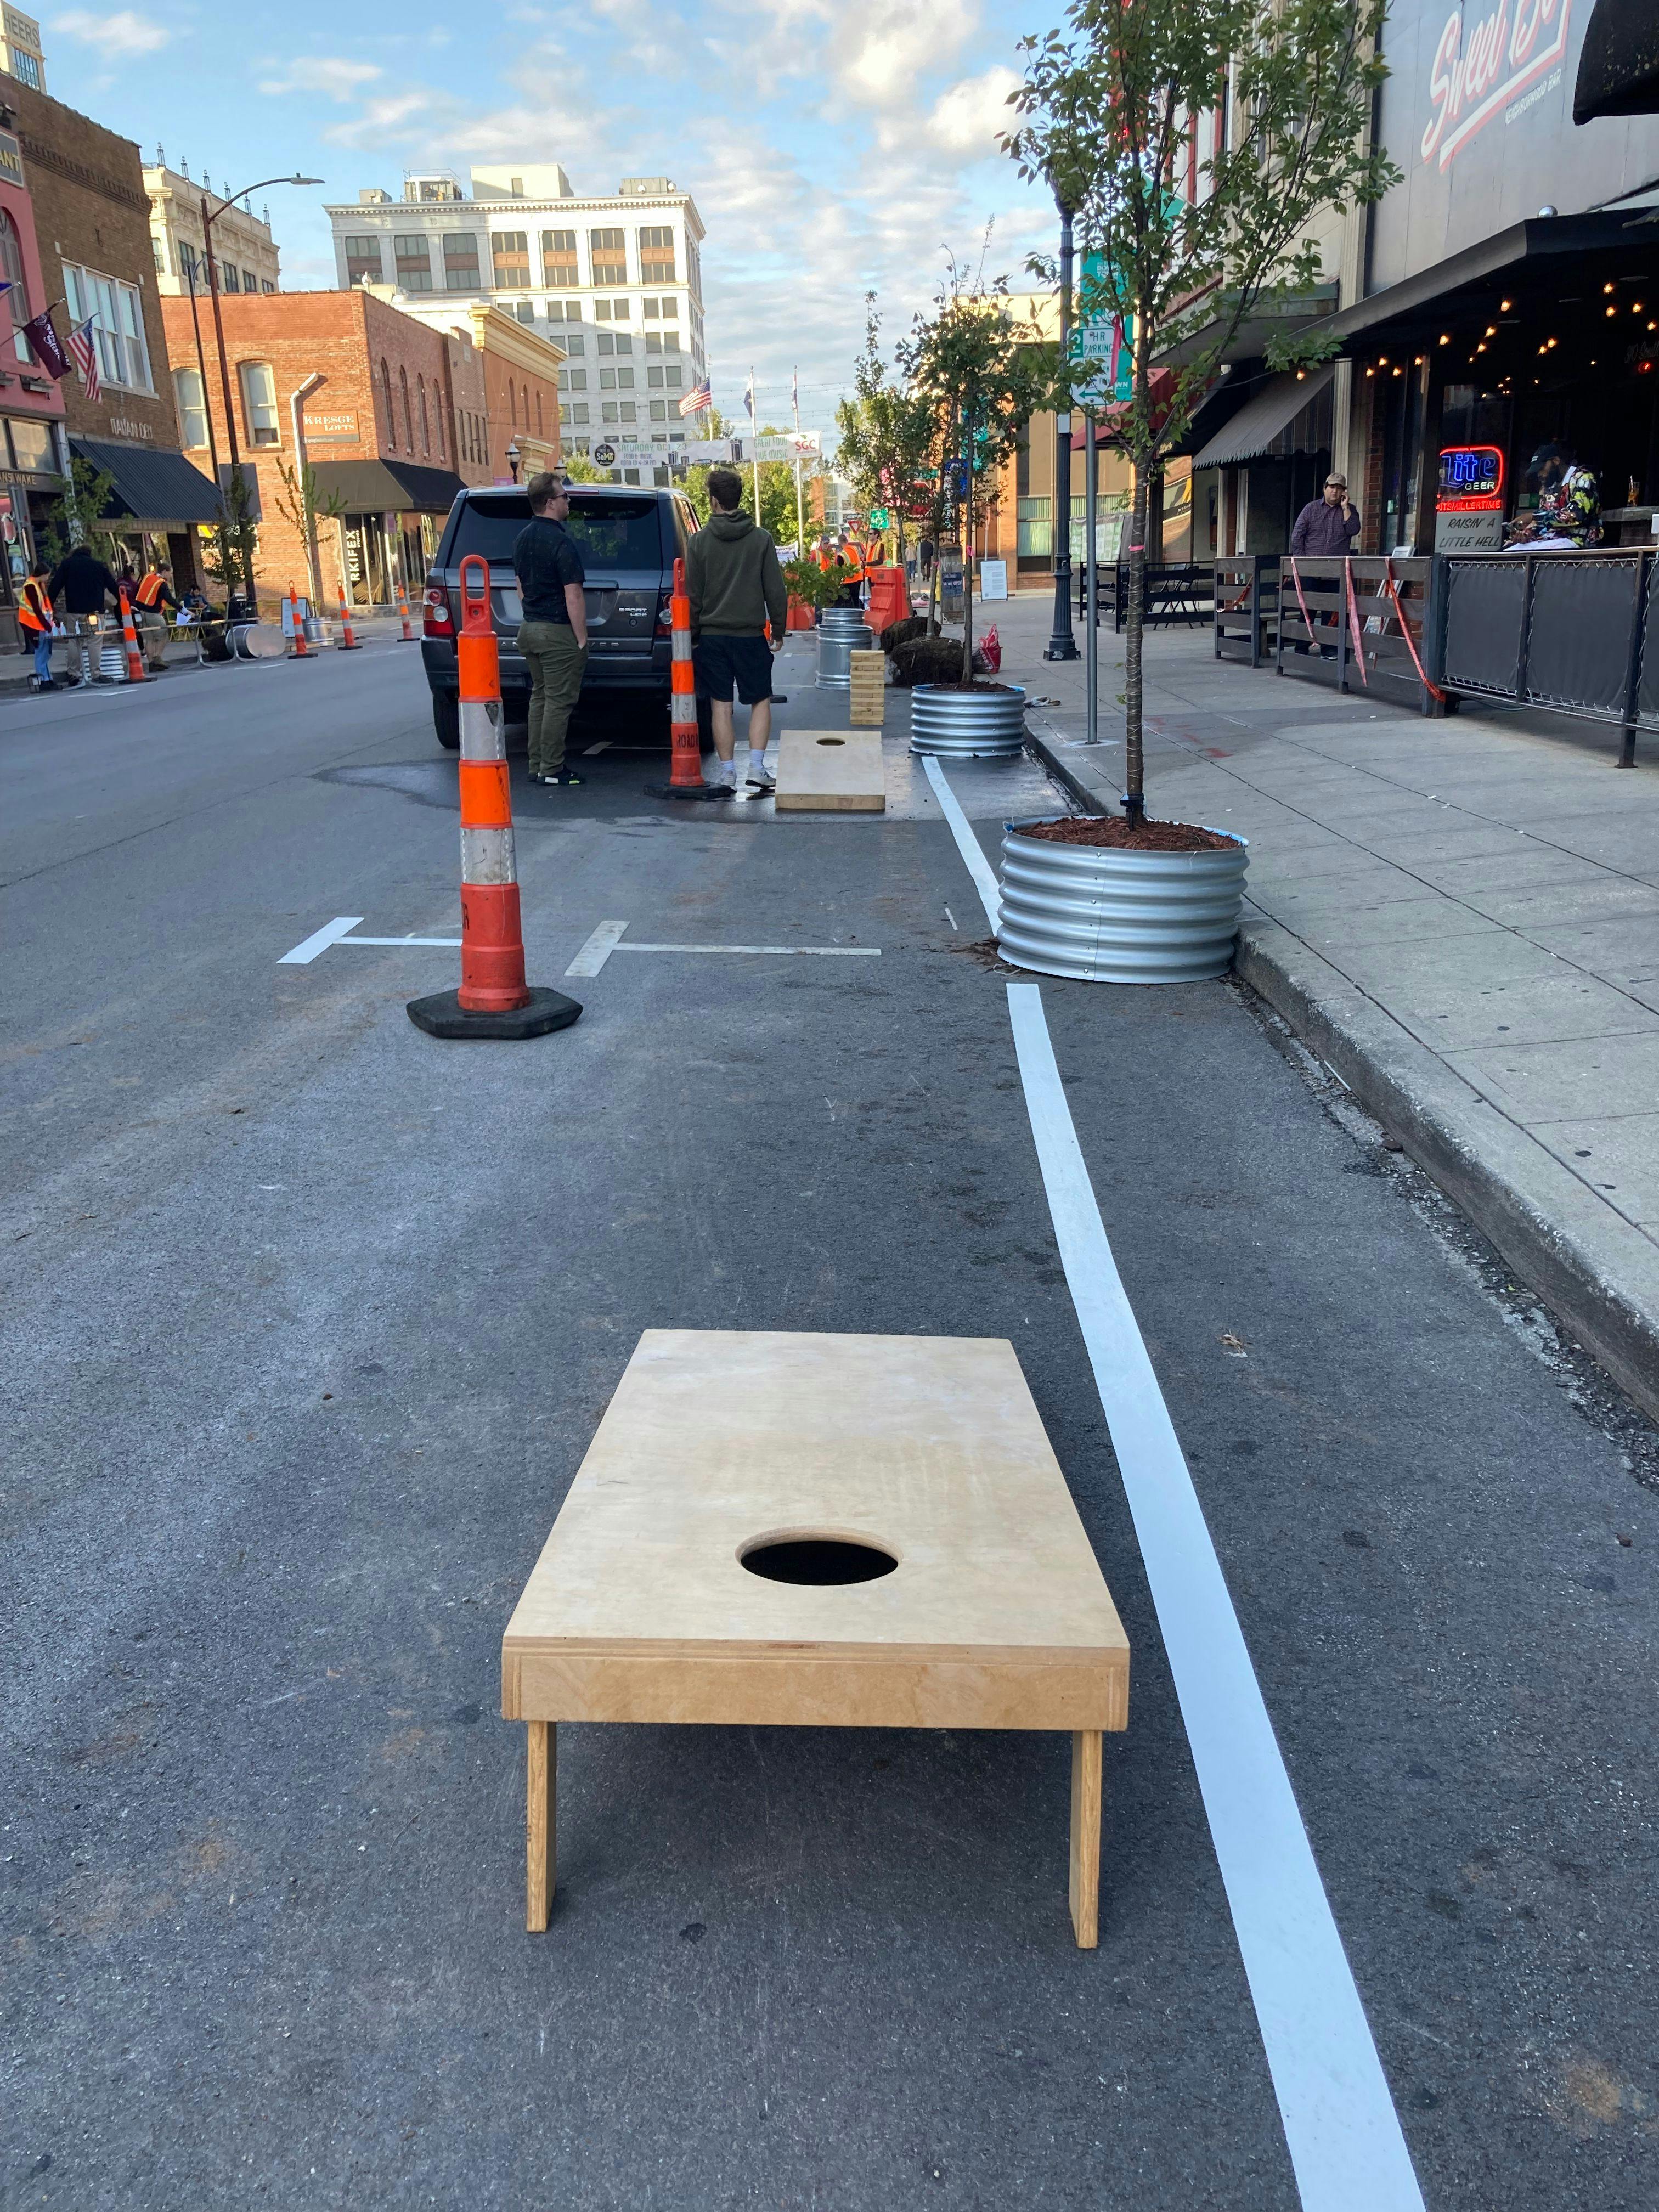 Image of a bean bag toss game on South Avenue.